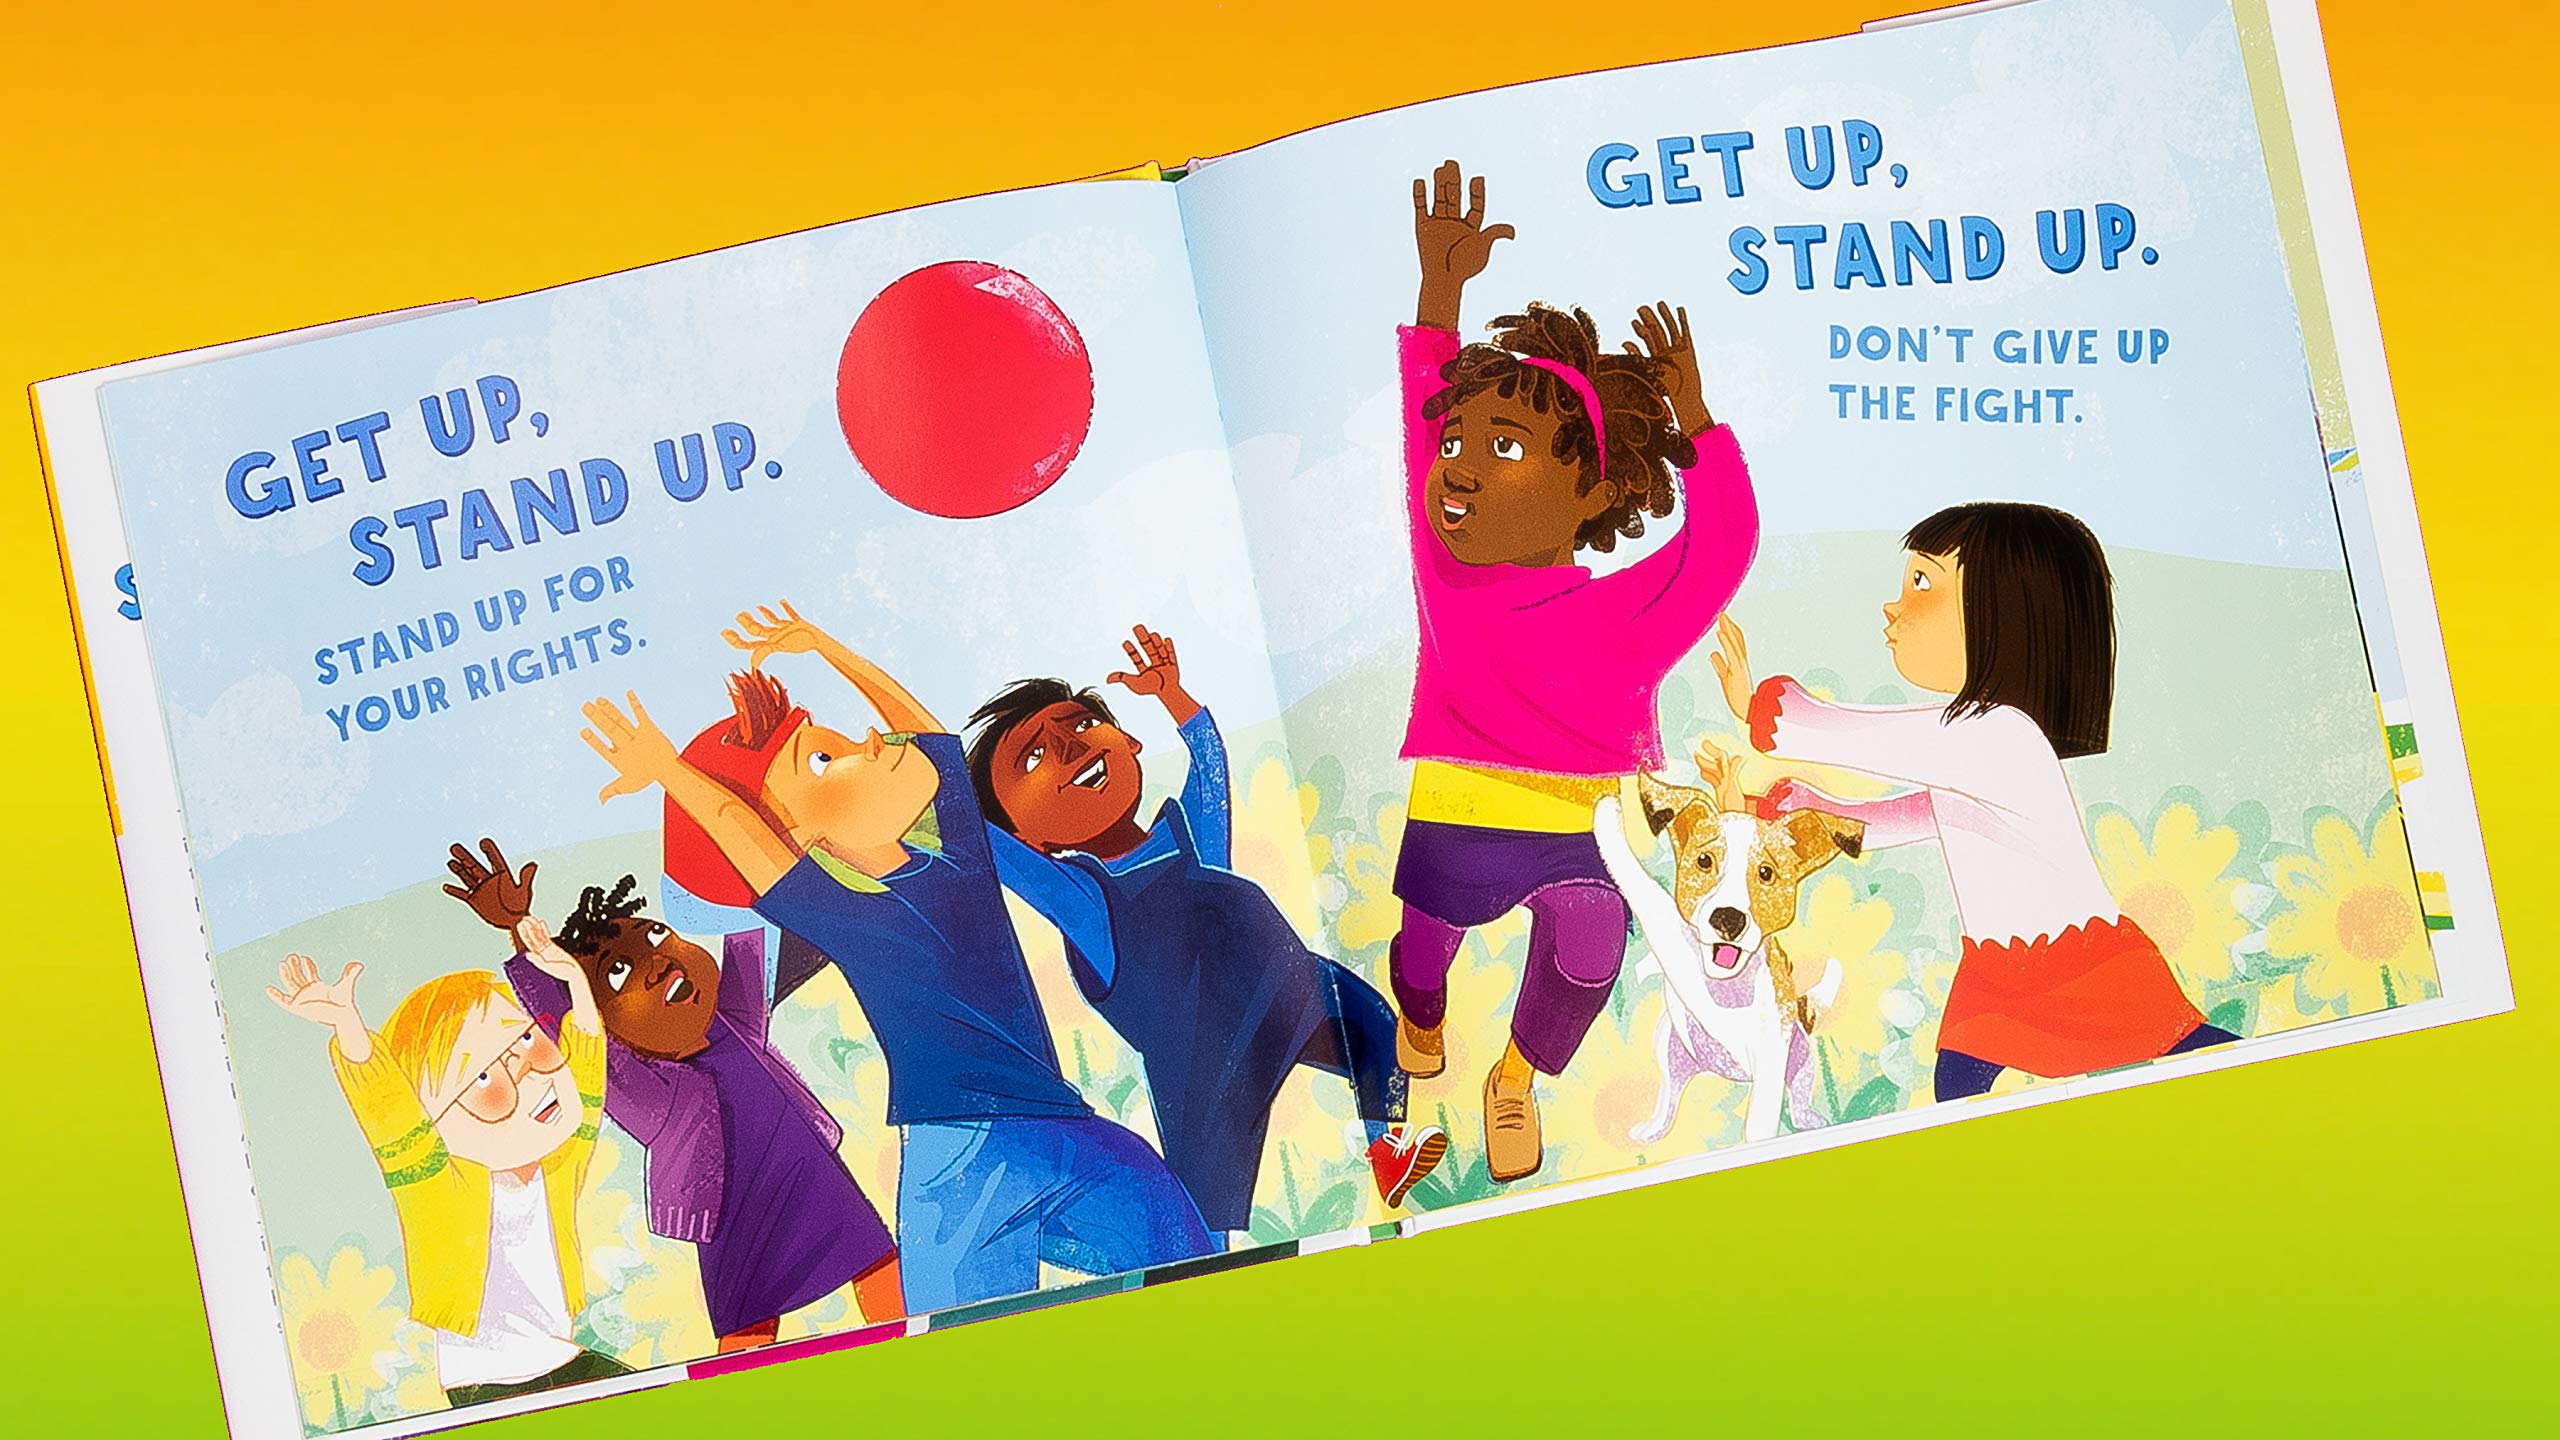 Get Up, Stand Up: (Preschool Music Book, Multicultural Books for Kids, Diversity Books for Toddlers, Bob Marley Children's Books) (Bob Marley by Chronicle Books)